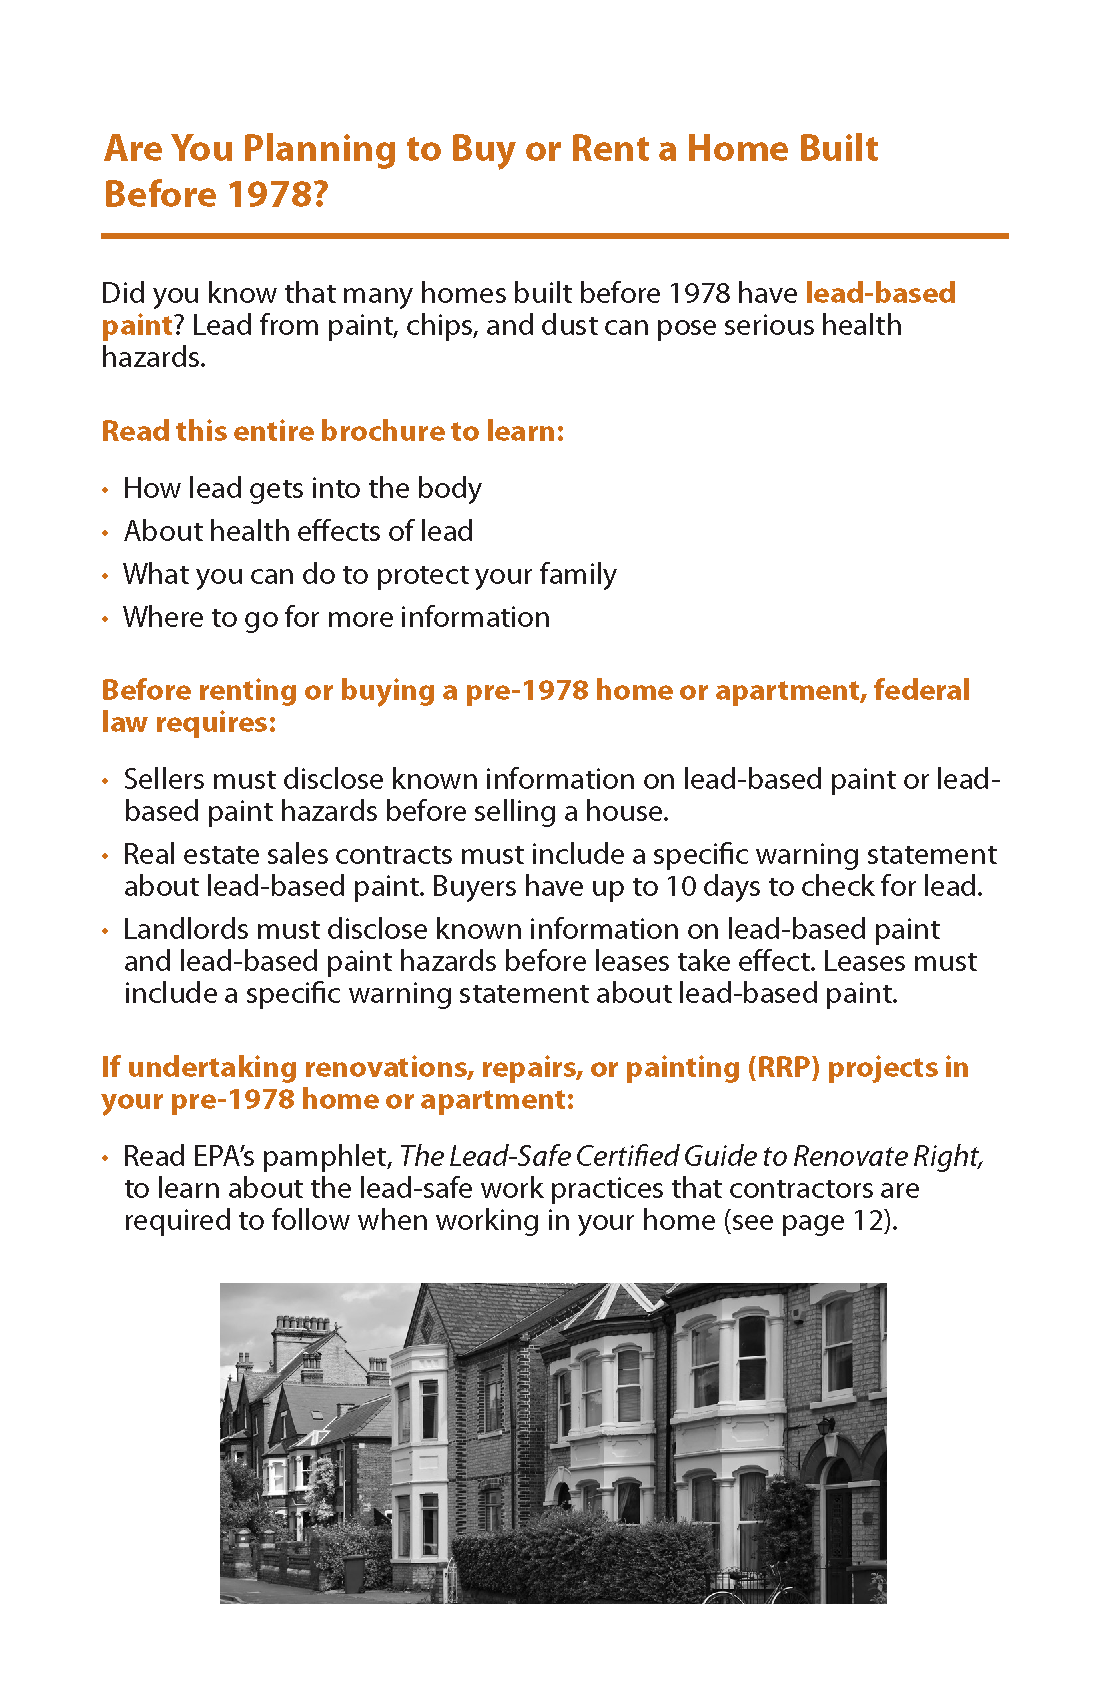 Bradford County Protect your family from lead based paint